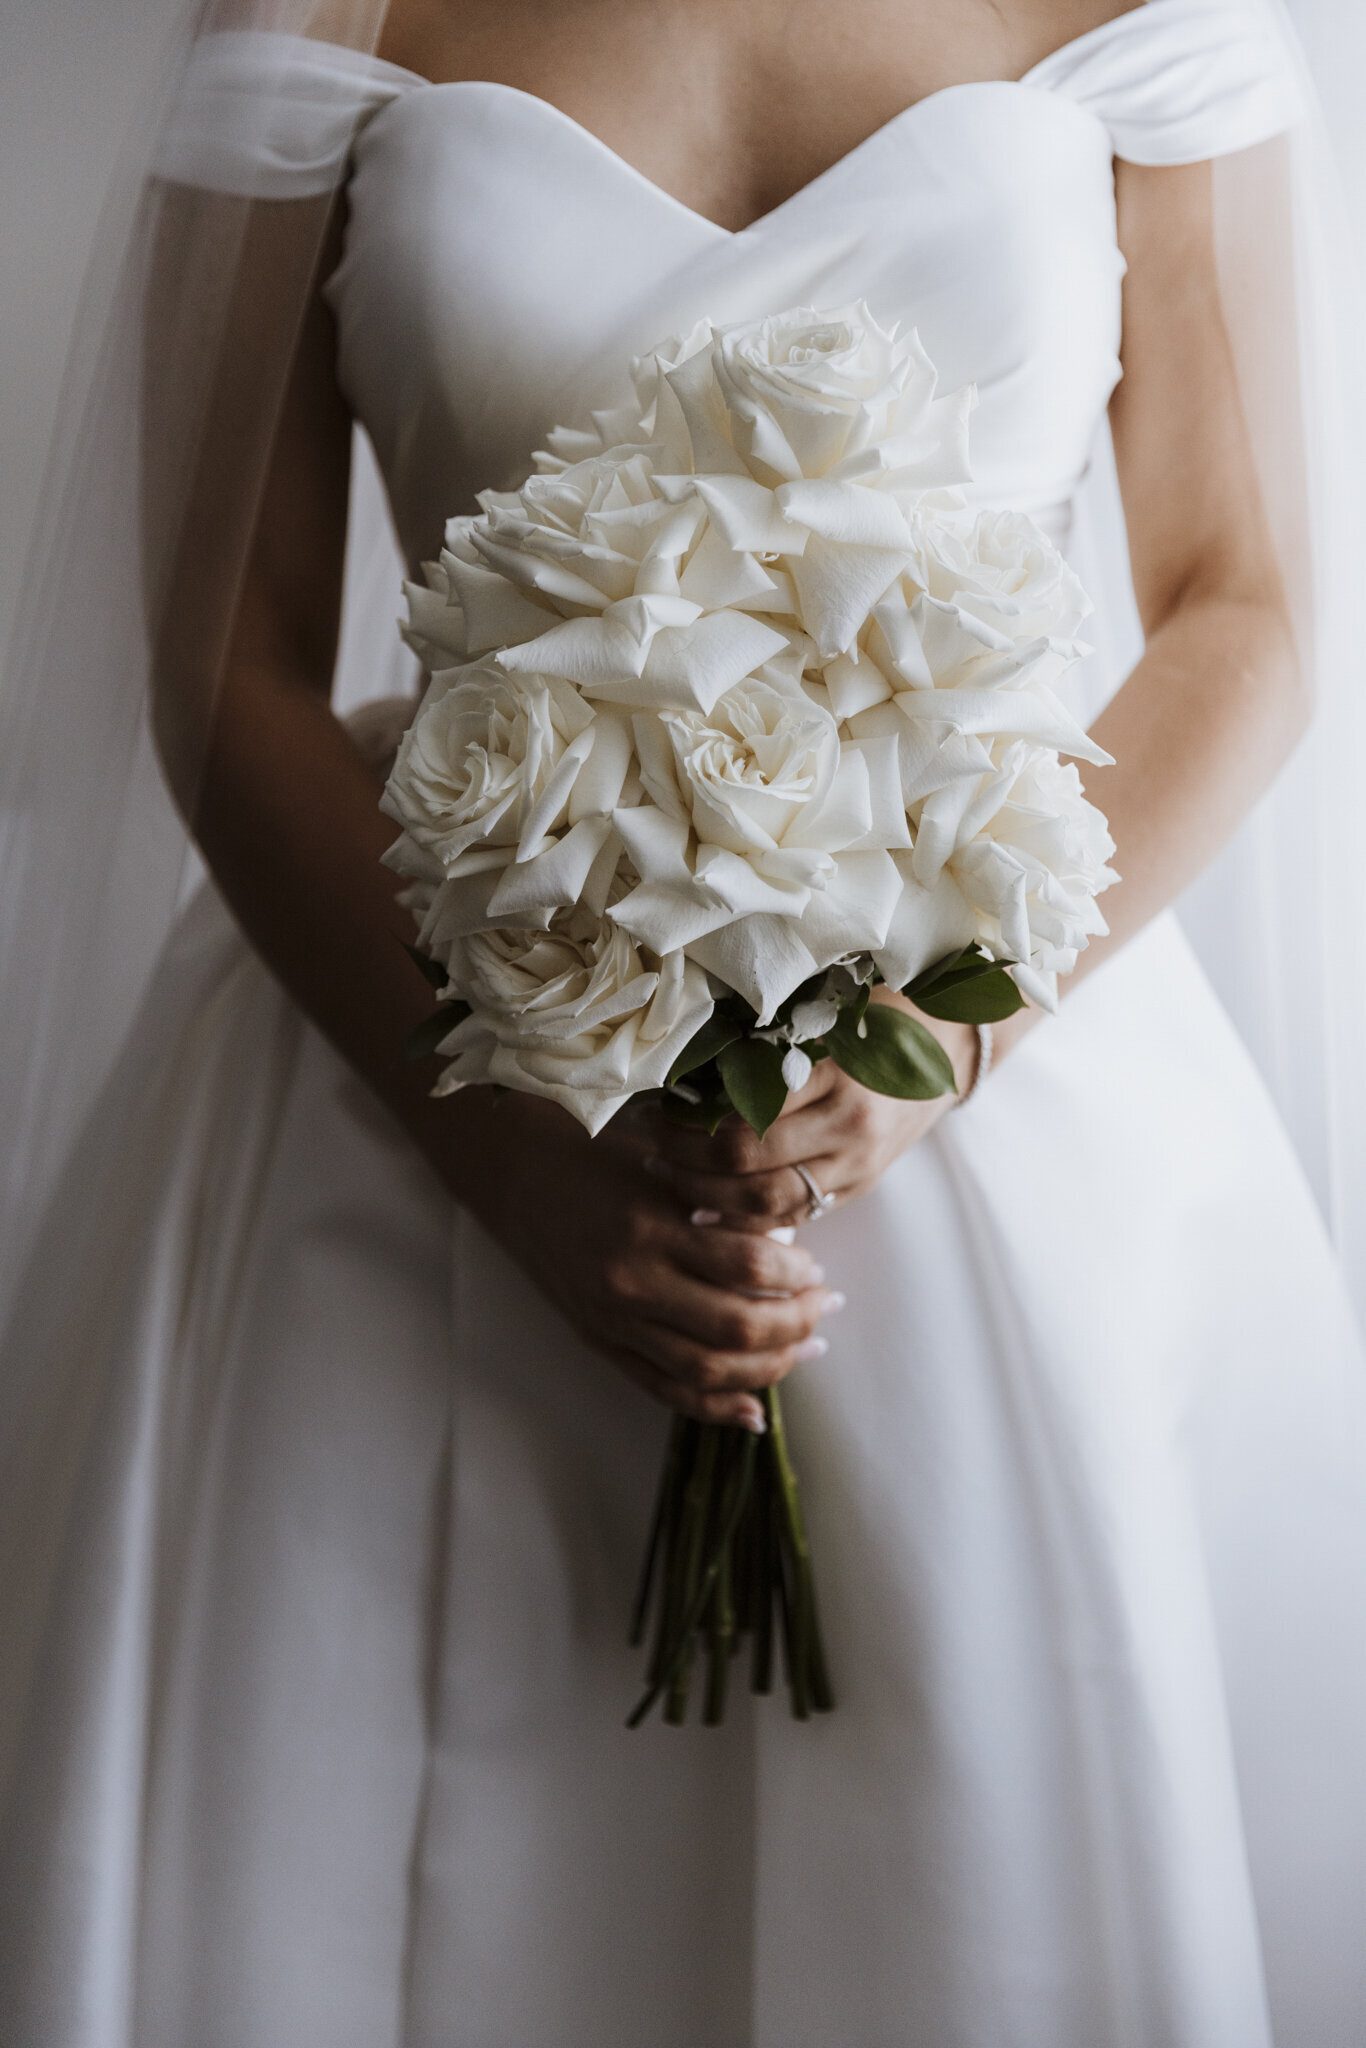 A white rose wedding bouquet held by a woman in a white dress